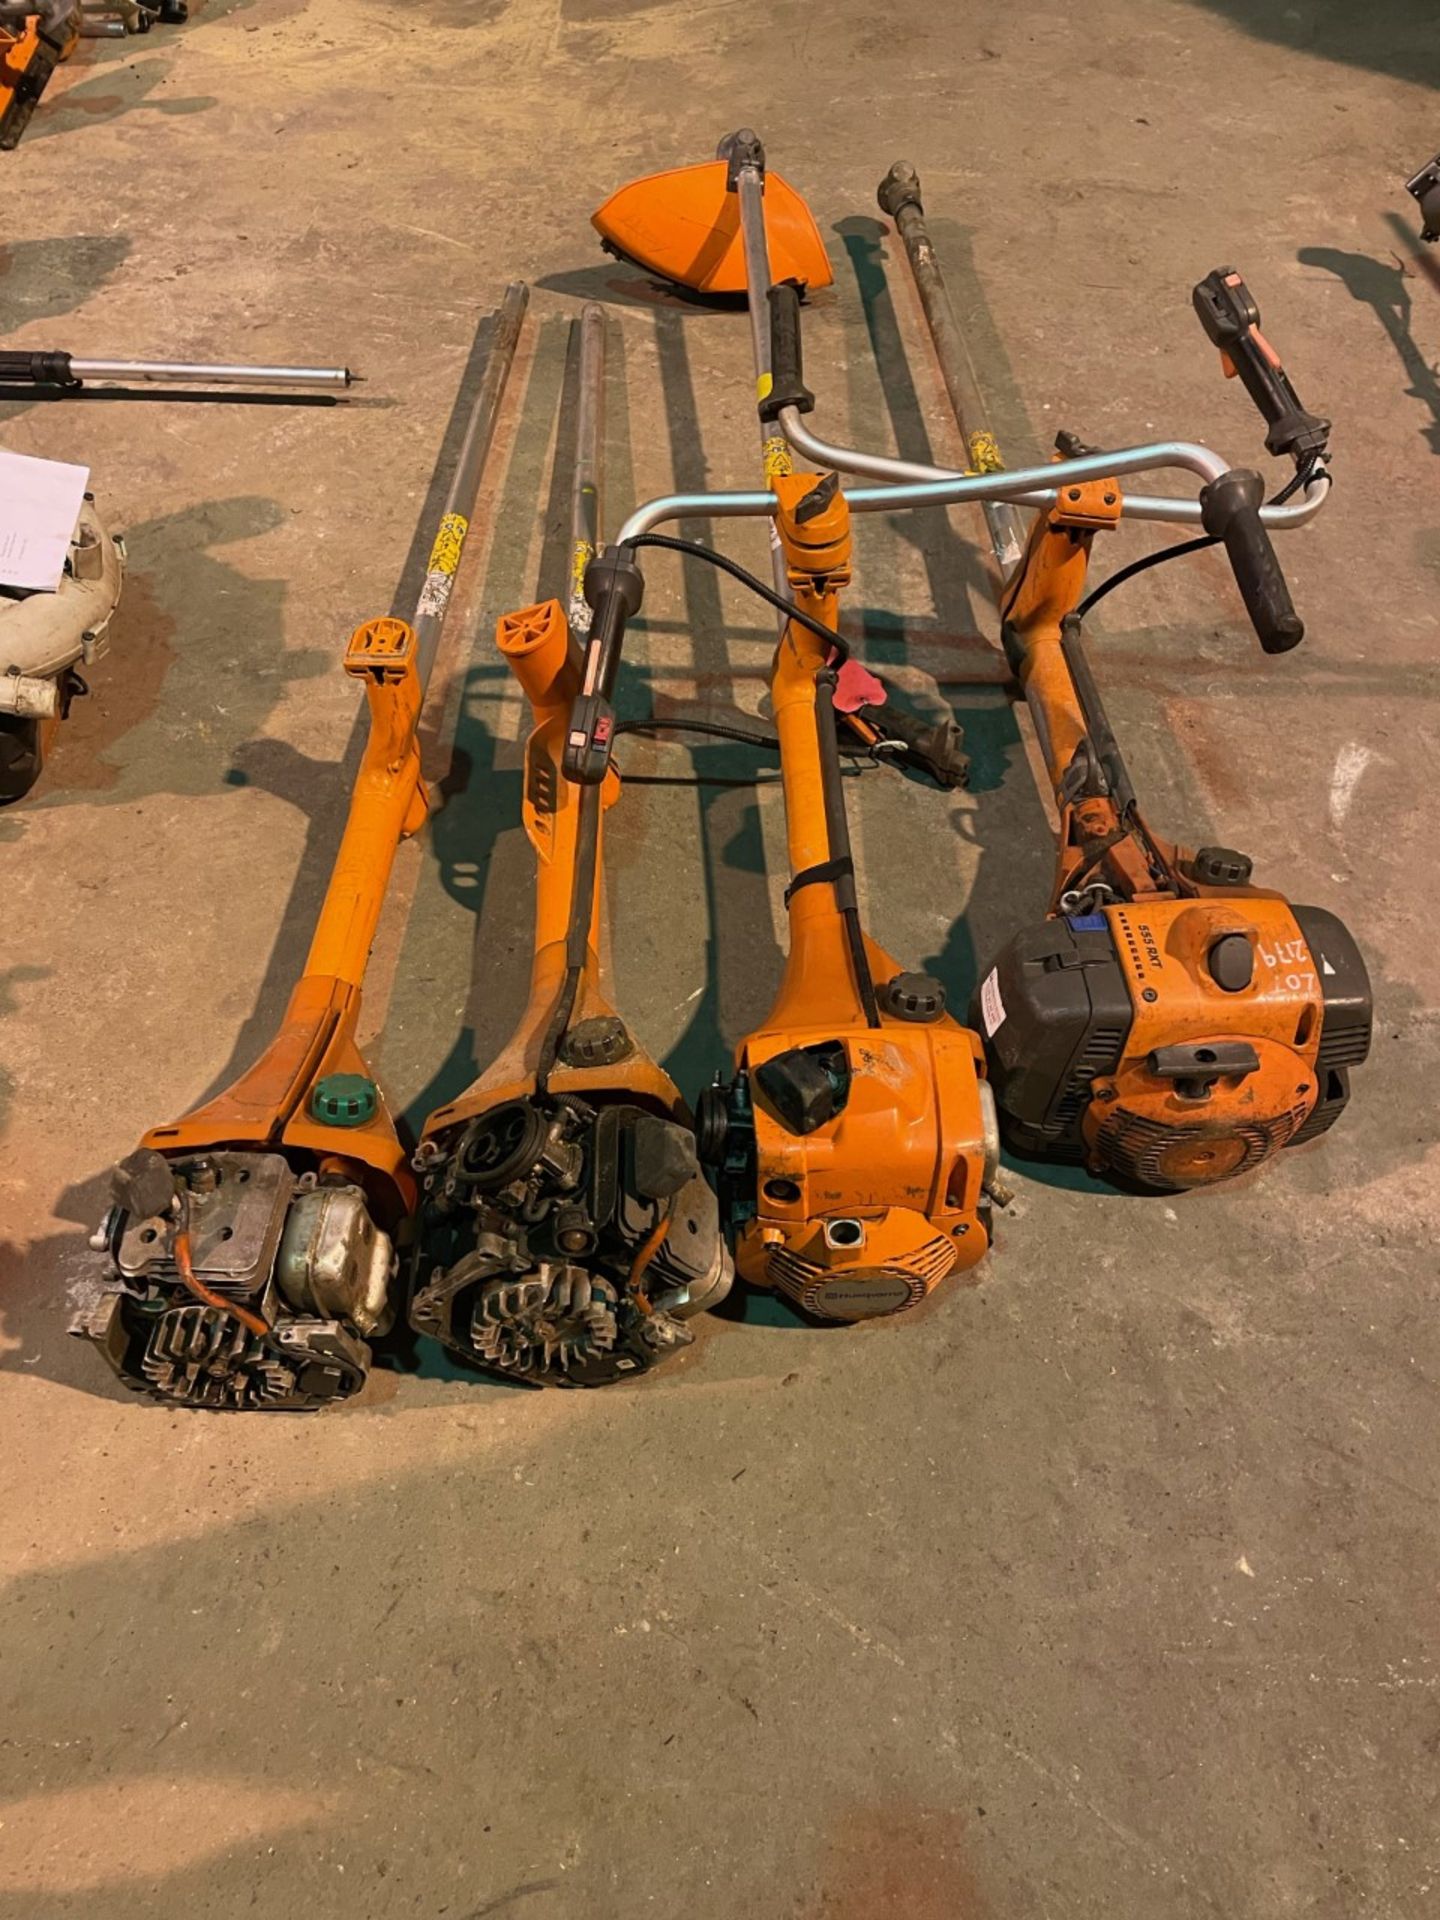 Job lot of 4 Husqvarna 545RXT strimmers spares or repair.